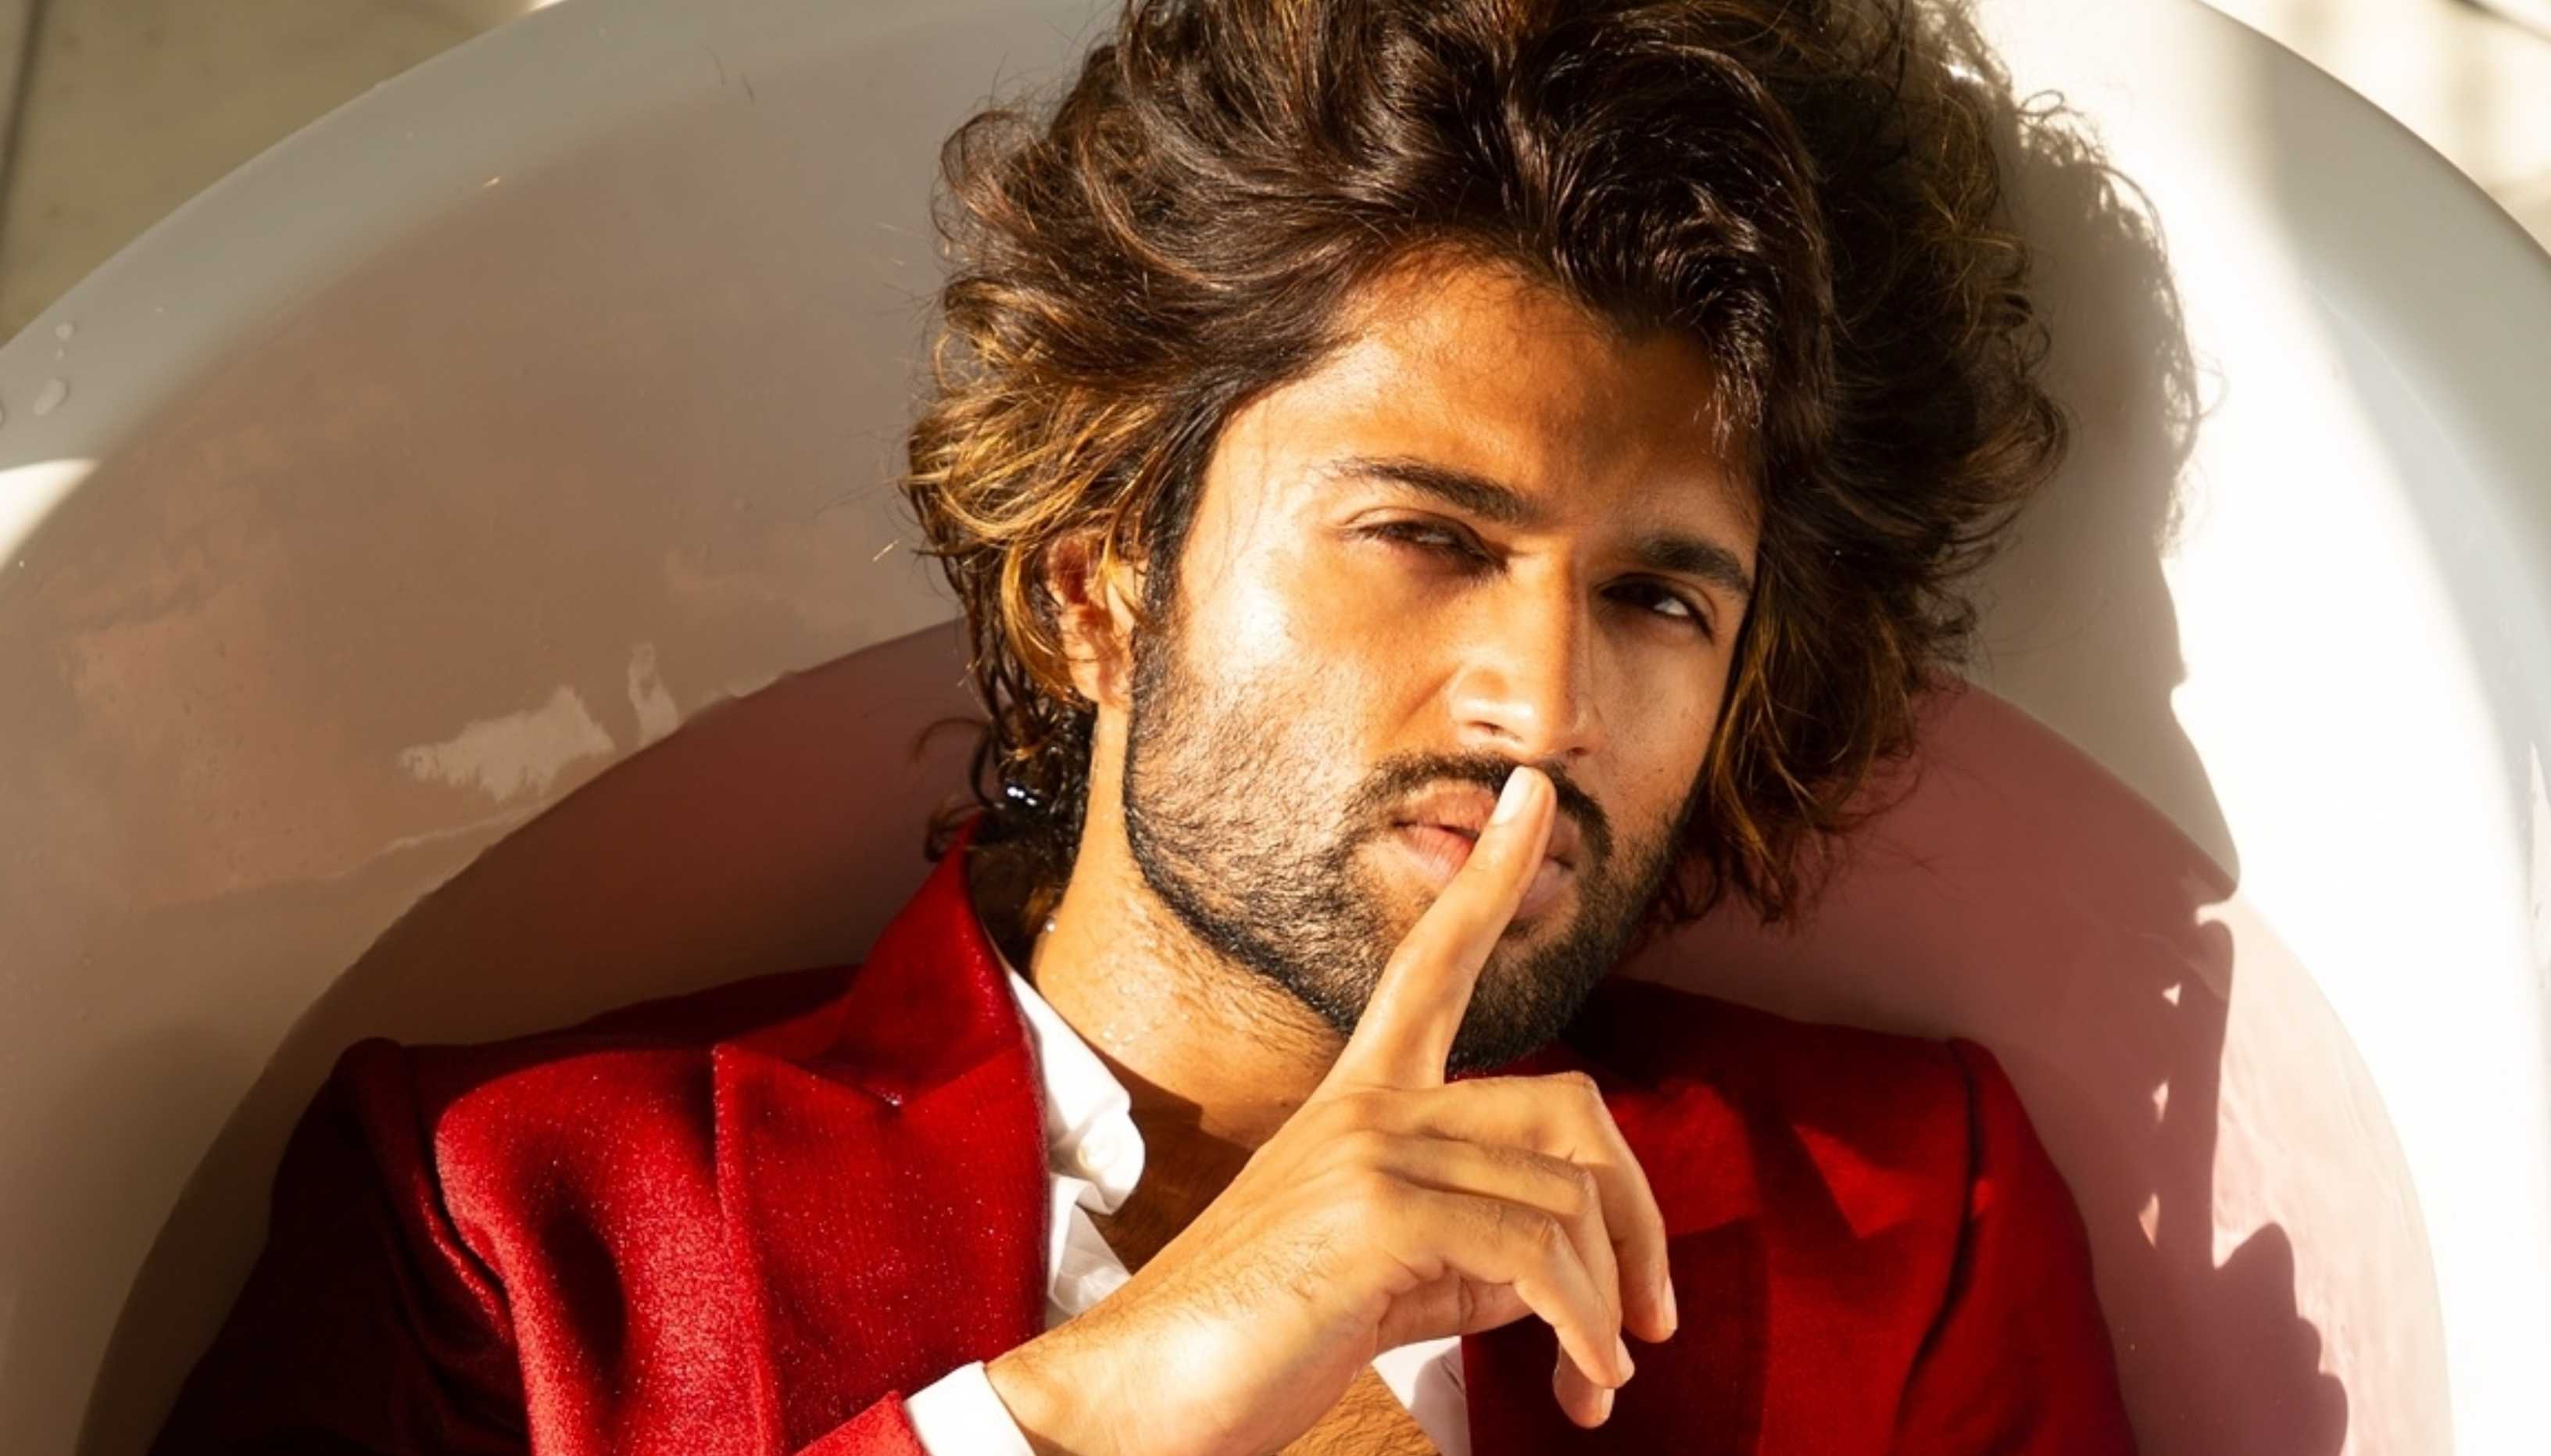 Liger star Vijay Deverakonda receiving hate message from his fans in Hyderabad, here's why